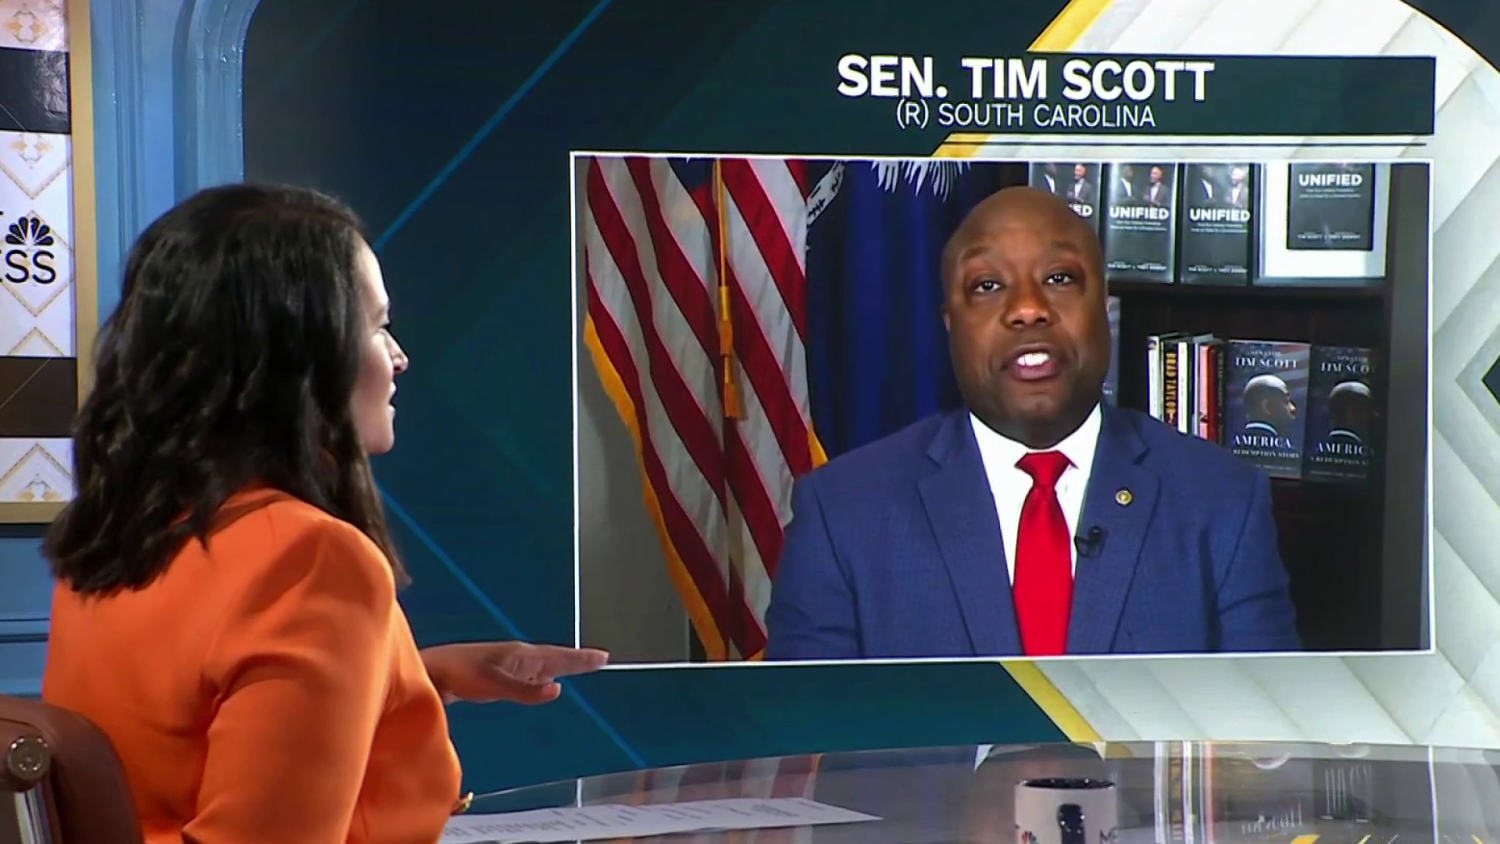 Tim Scott appears to back away from federal abortion ban as he campaigns with Trump